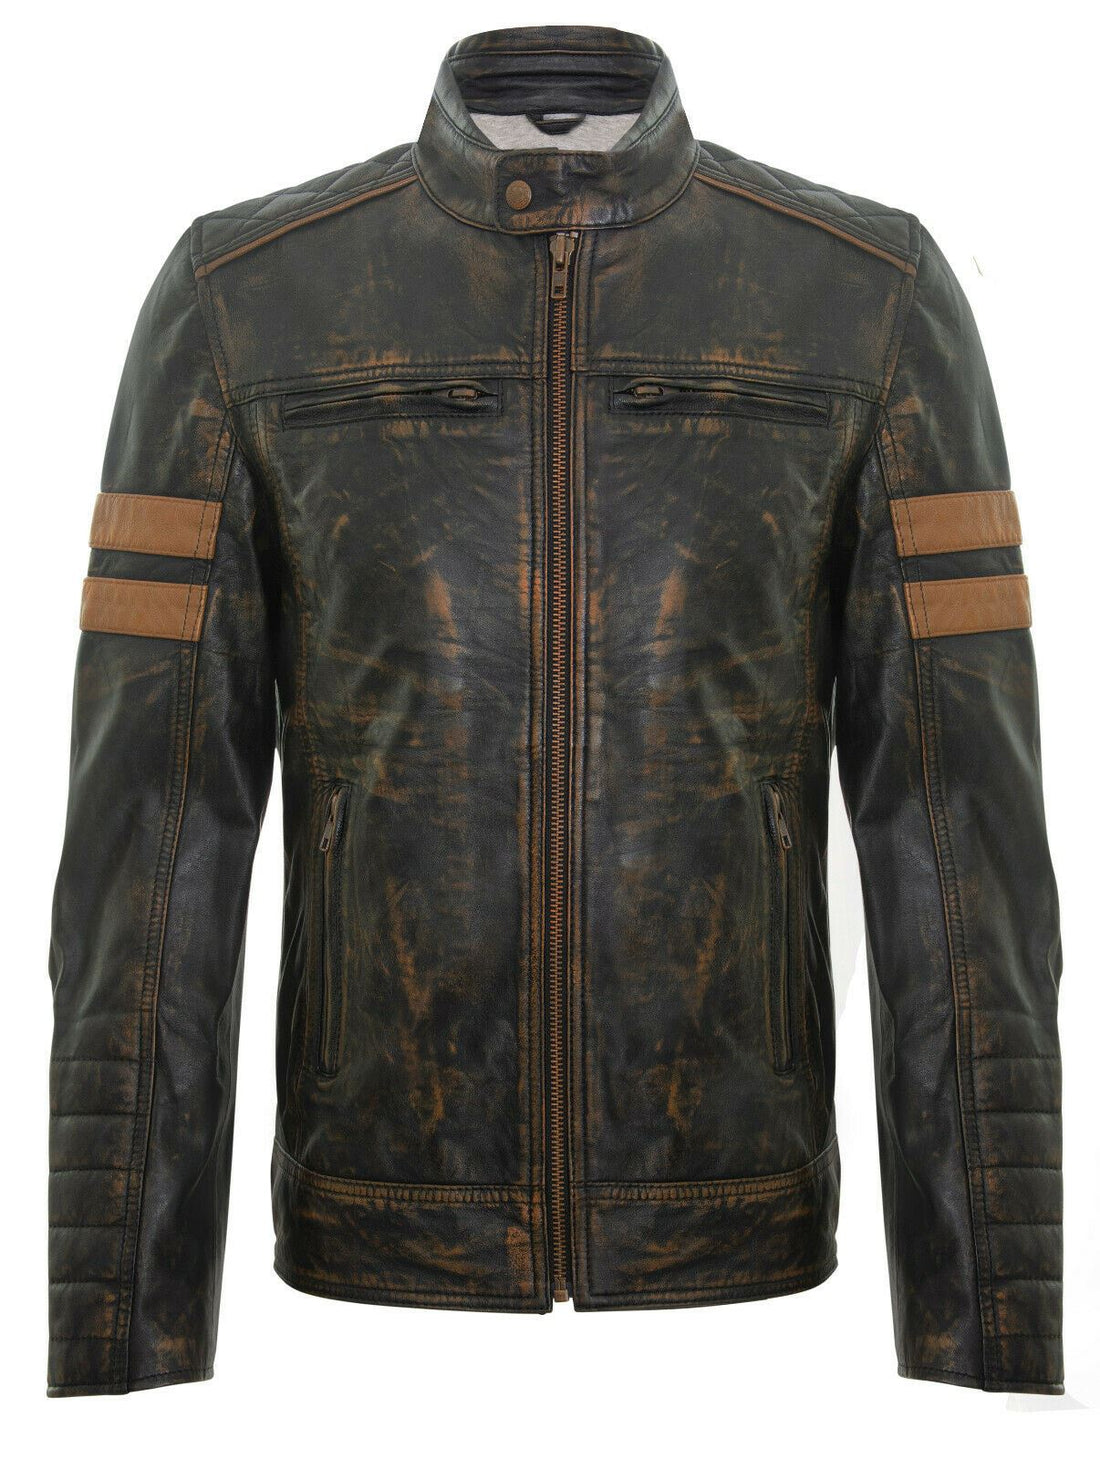 Men’s Vintage Striped Racing Leather Jacket-Stamford - Upperclass Fashions 